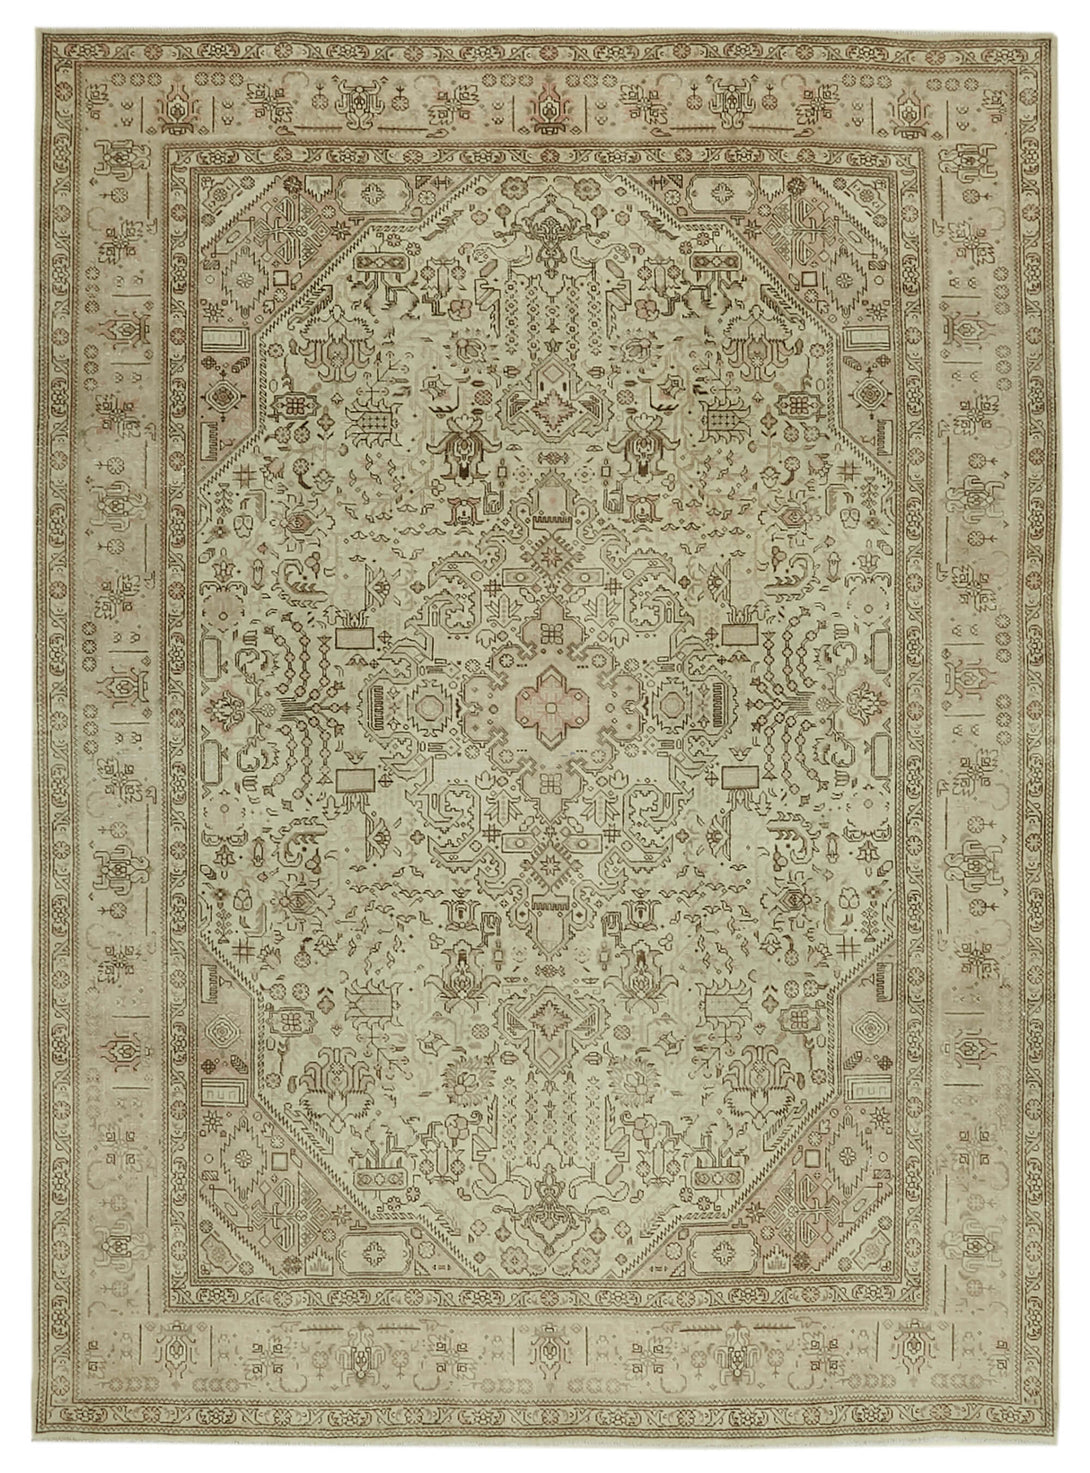 Handmade Persian Vintage Area Rug > Design# OL-AC-41069 > Size: 8'-2" x 11'-1", Carpet Culture Rugs, Handmade Rugs, NYC Rugs, New Rugs, Shop Rugs, Rug Store, Outlet Rugs, SoHo Rugs, Rugs in USA